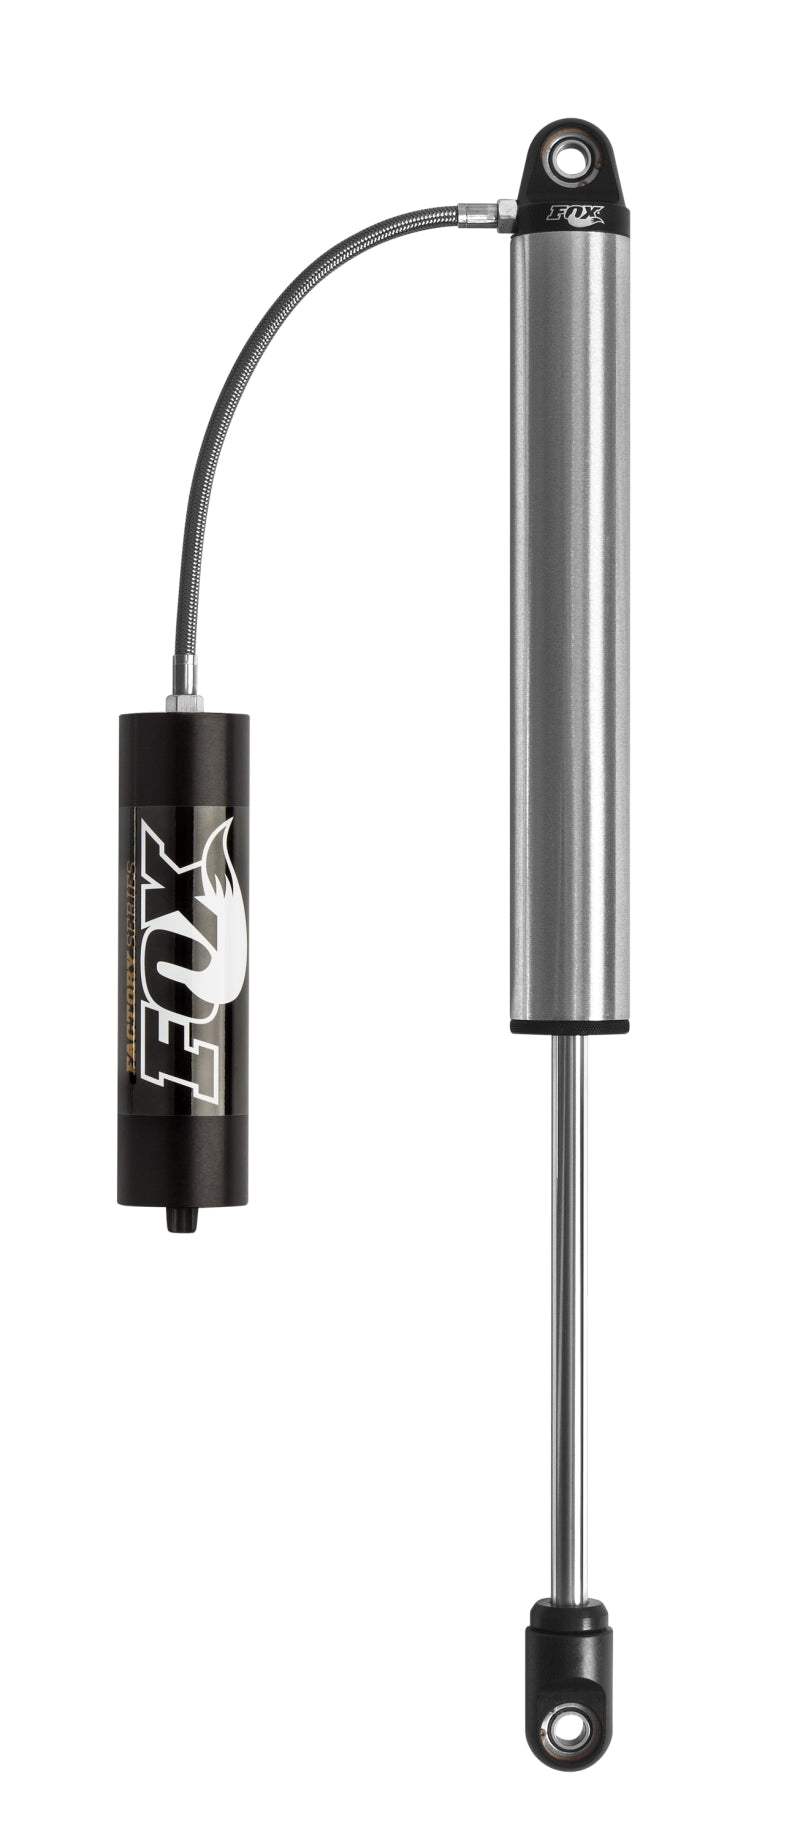 Fox 2.0 Factory Series 8.5in. Smooth Body Remote Reservoir Shock 5/8in. Shaft (30/90 Valving) - Blk